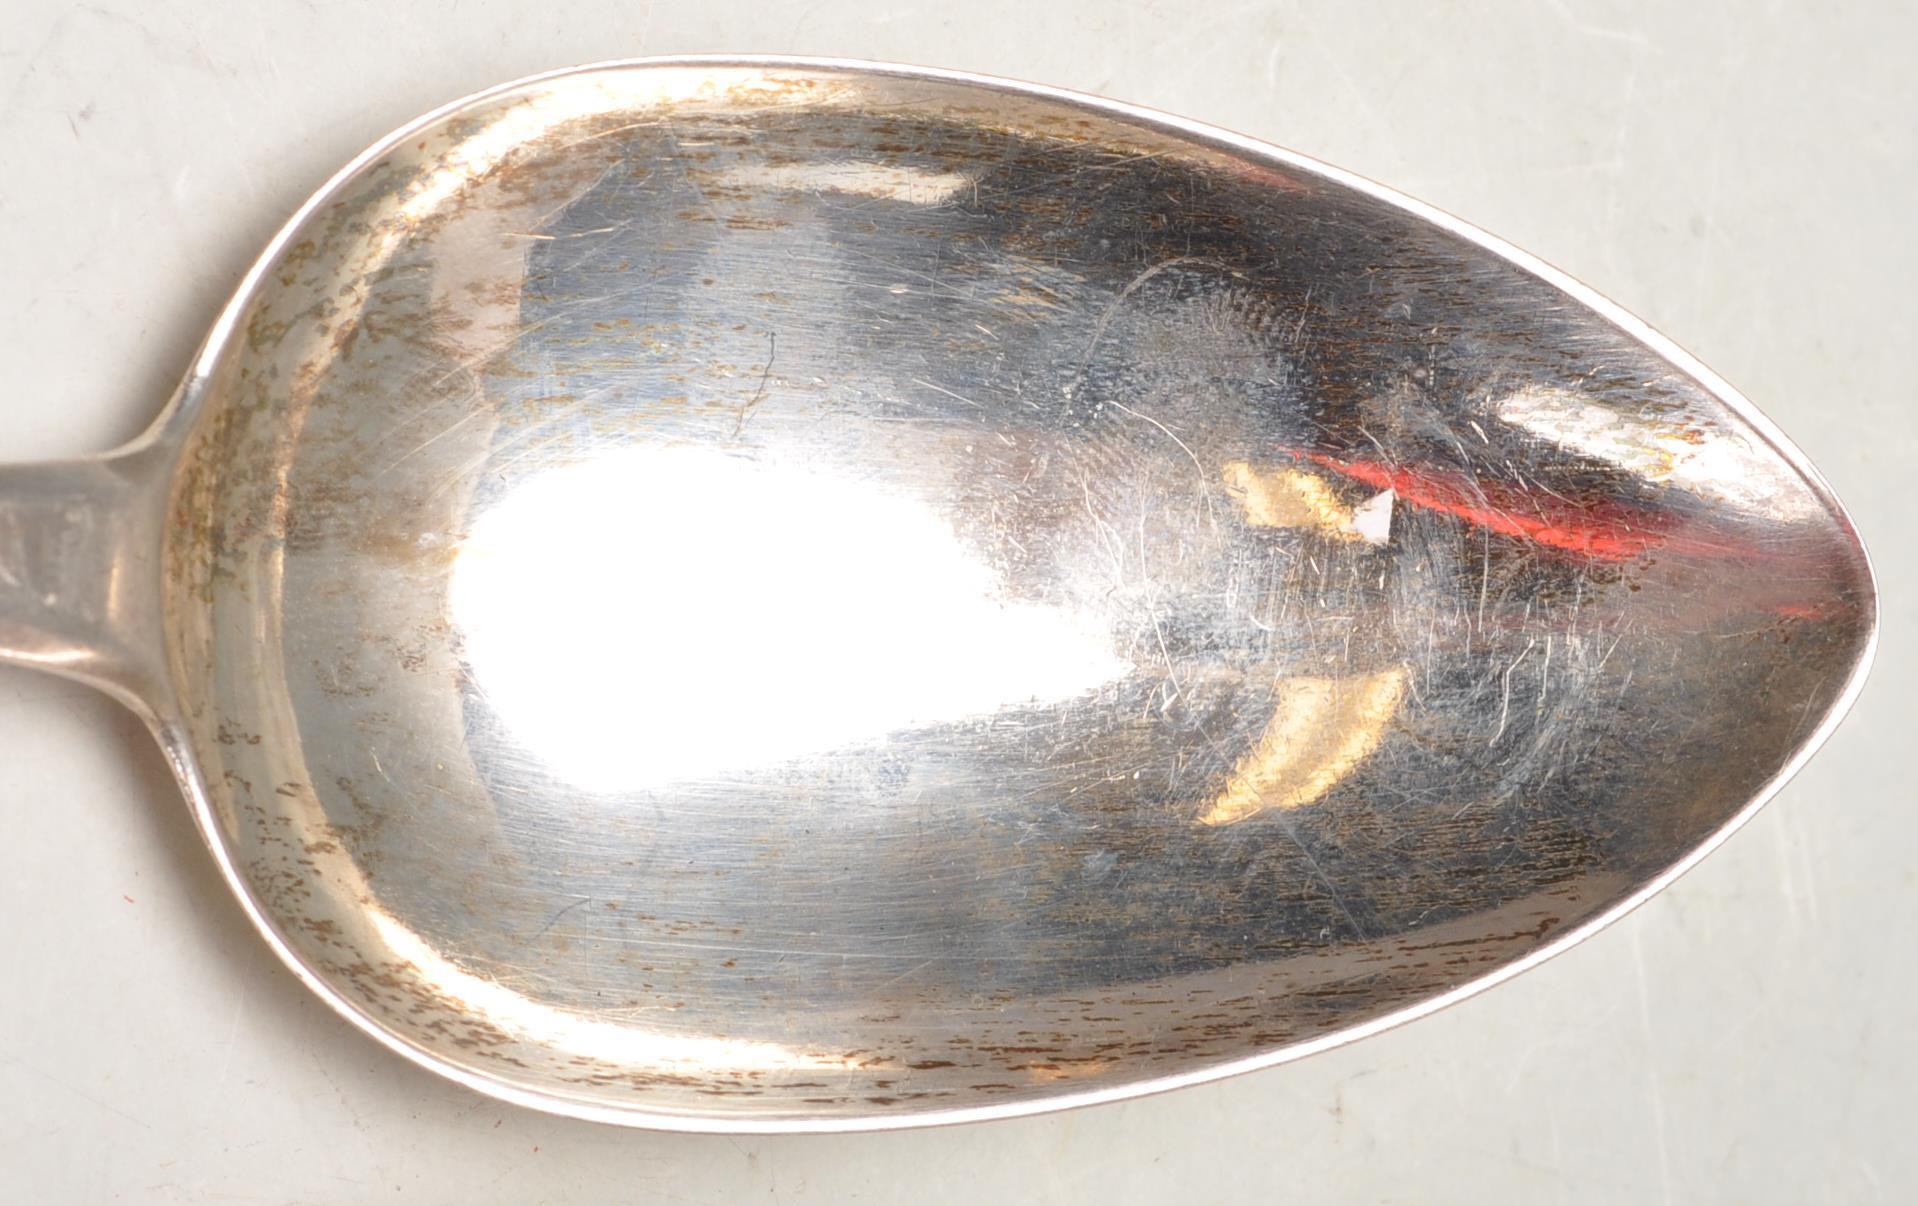 TWO 19TH CENTURY GEORG III SILVER HALLMARKS TABLE SPOON DATED 1819 / 1812 - Image 5 of 6